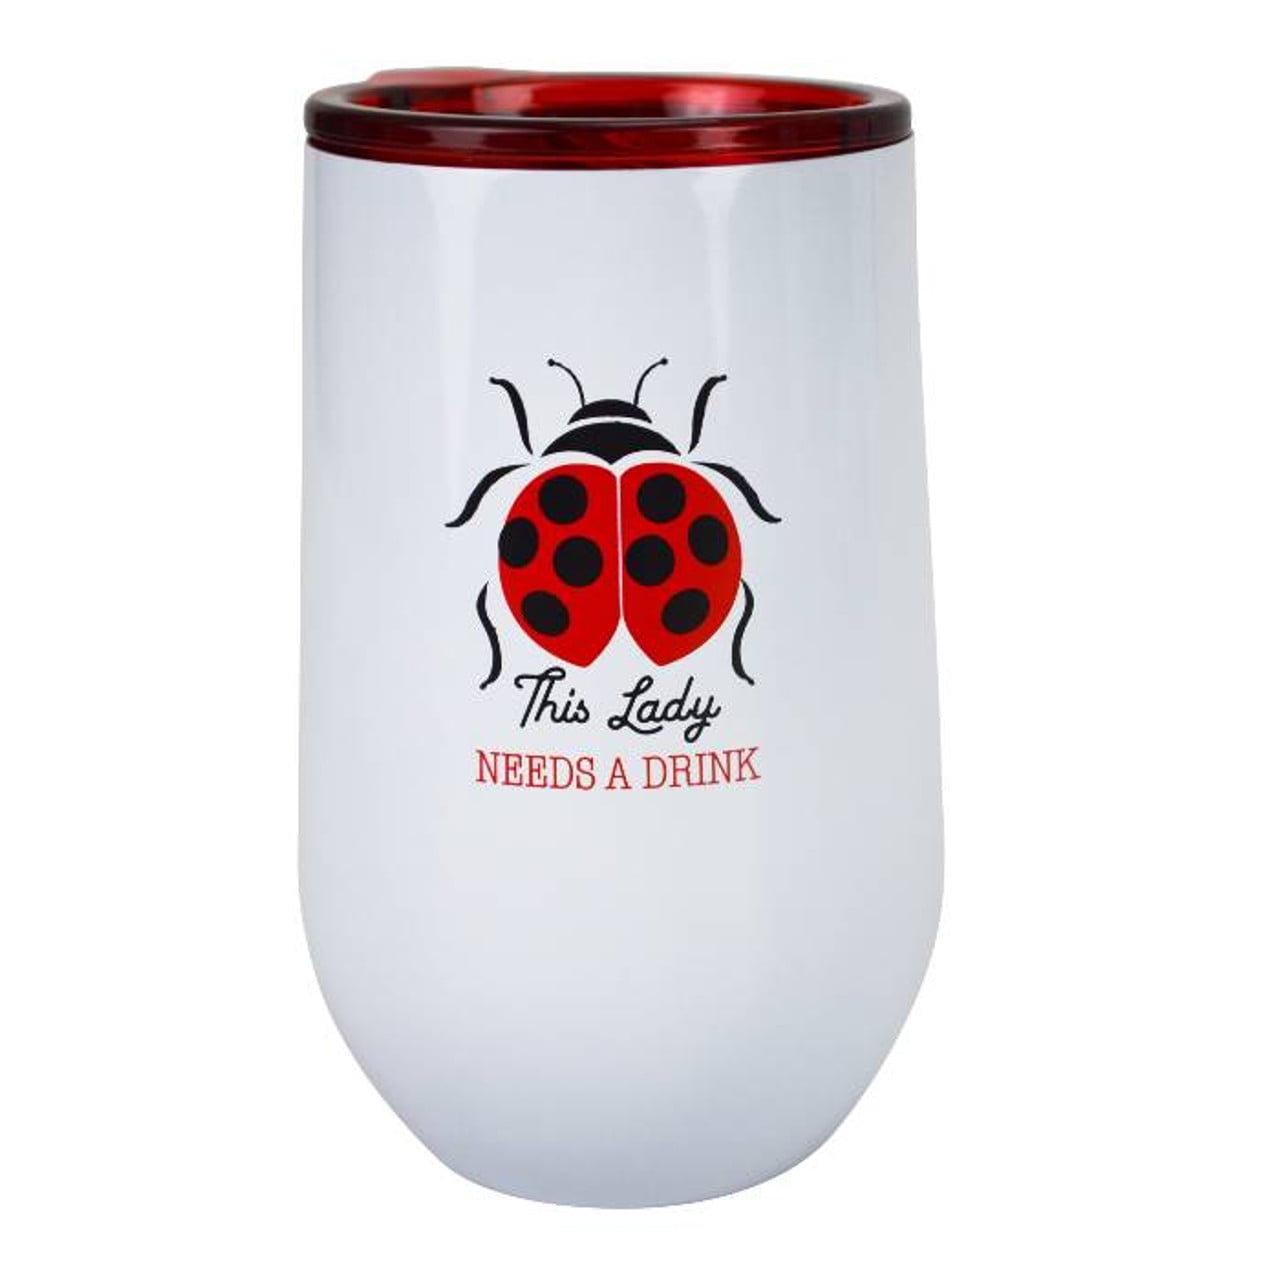 Starbucks BEETLE Cold Cup Tumbler with Replacement Lid & Straw